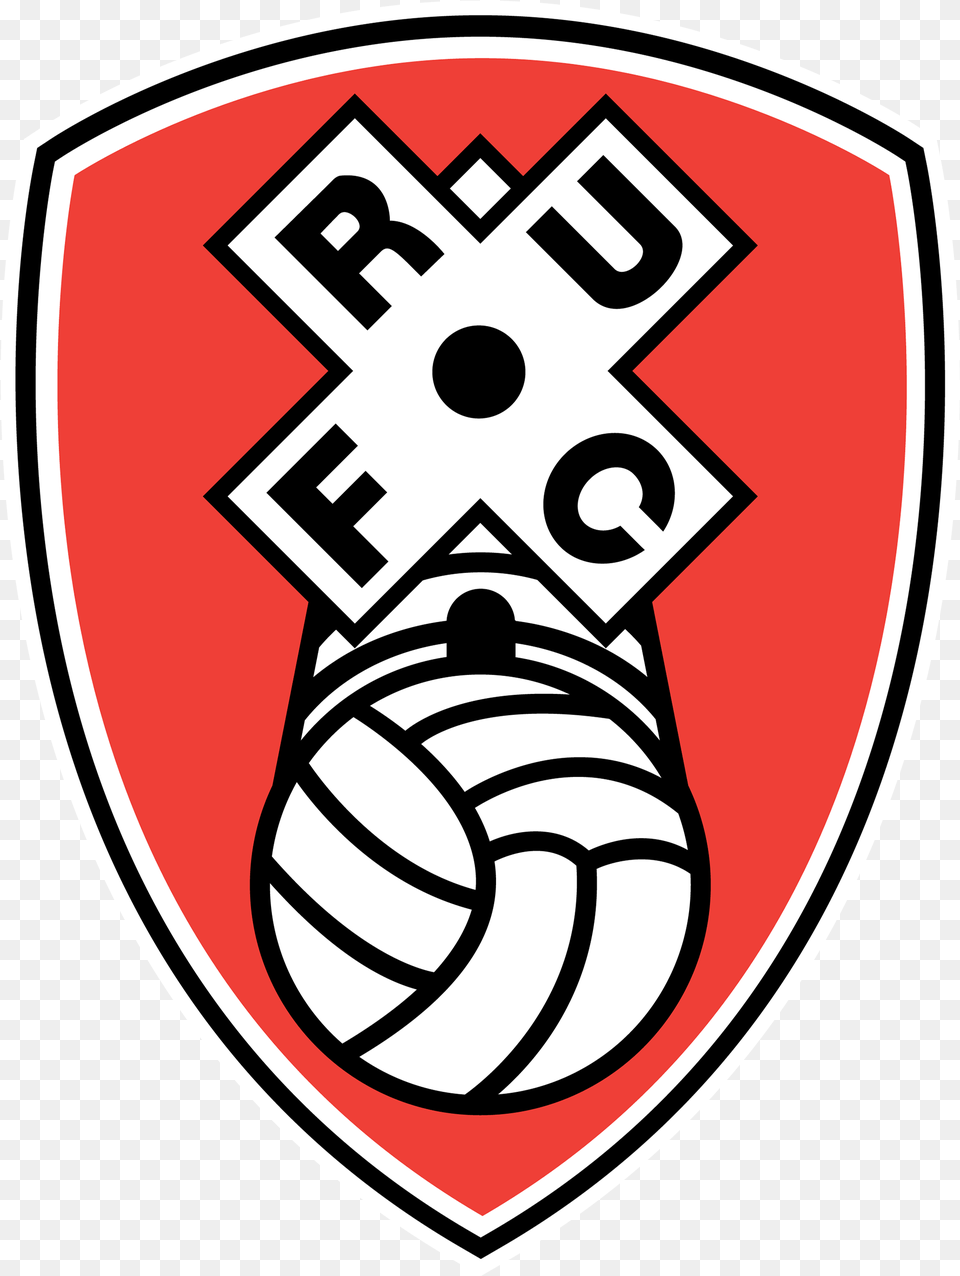 Rotherham United Fc Logo Rotherham United Fc Logo, Dynamite, Weapon, Armor, Symbol Png Image